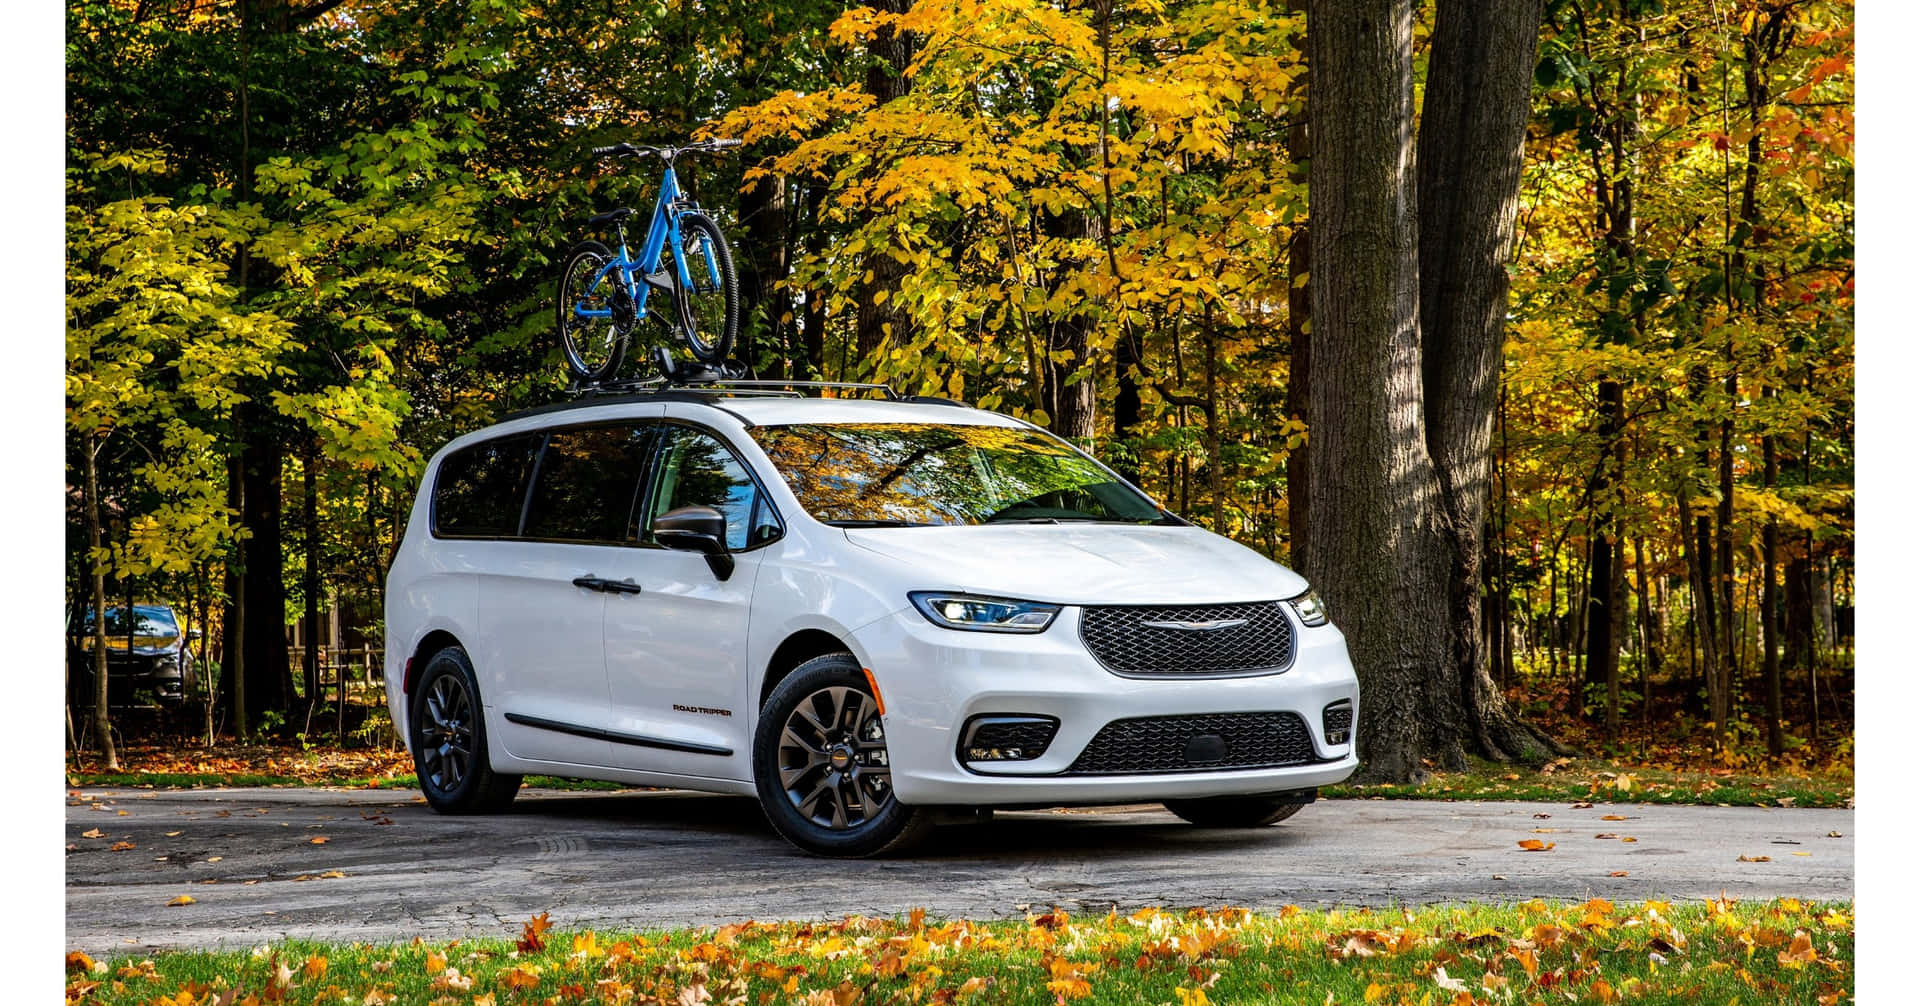 Stunning Chrysler Pacifica on a Scenic Road Wallpaper